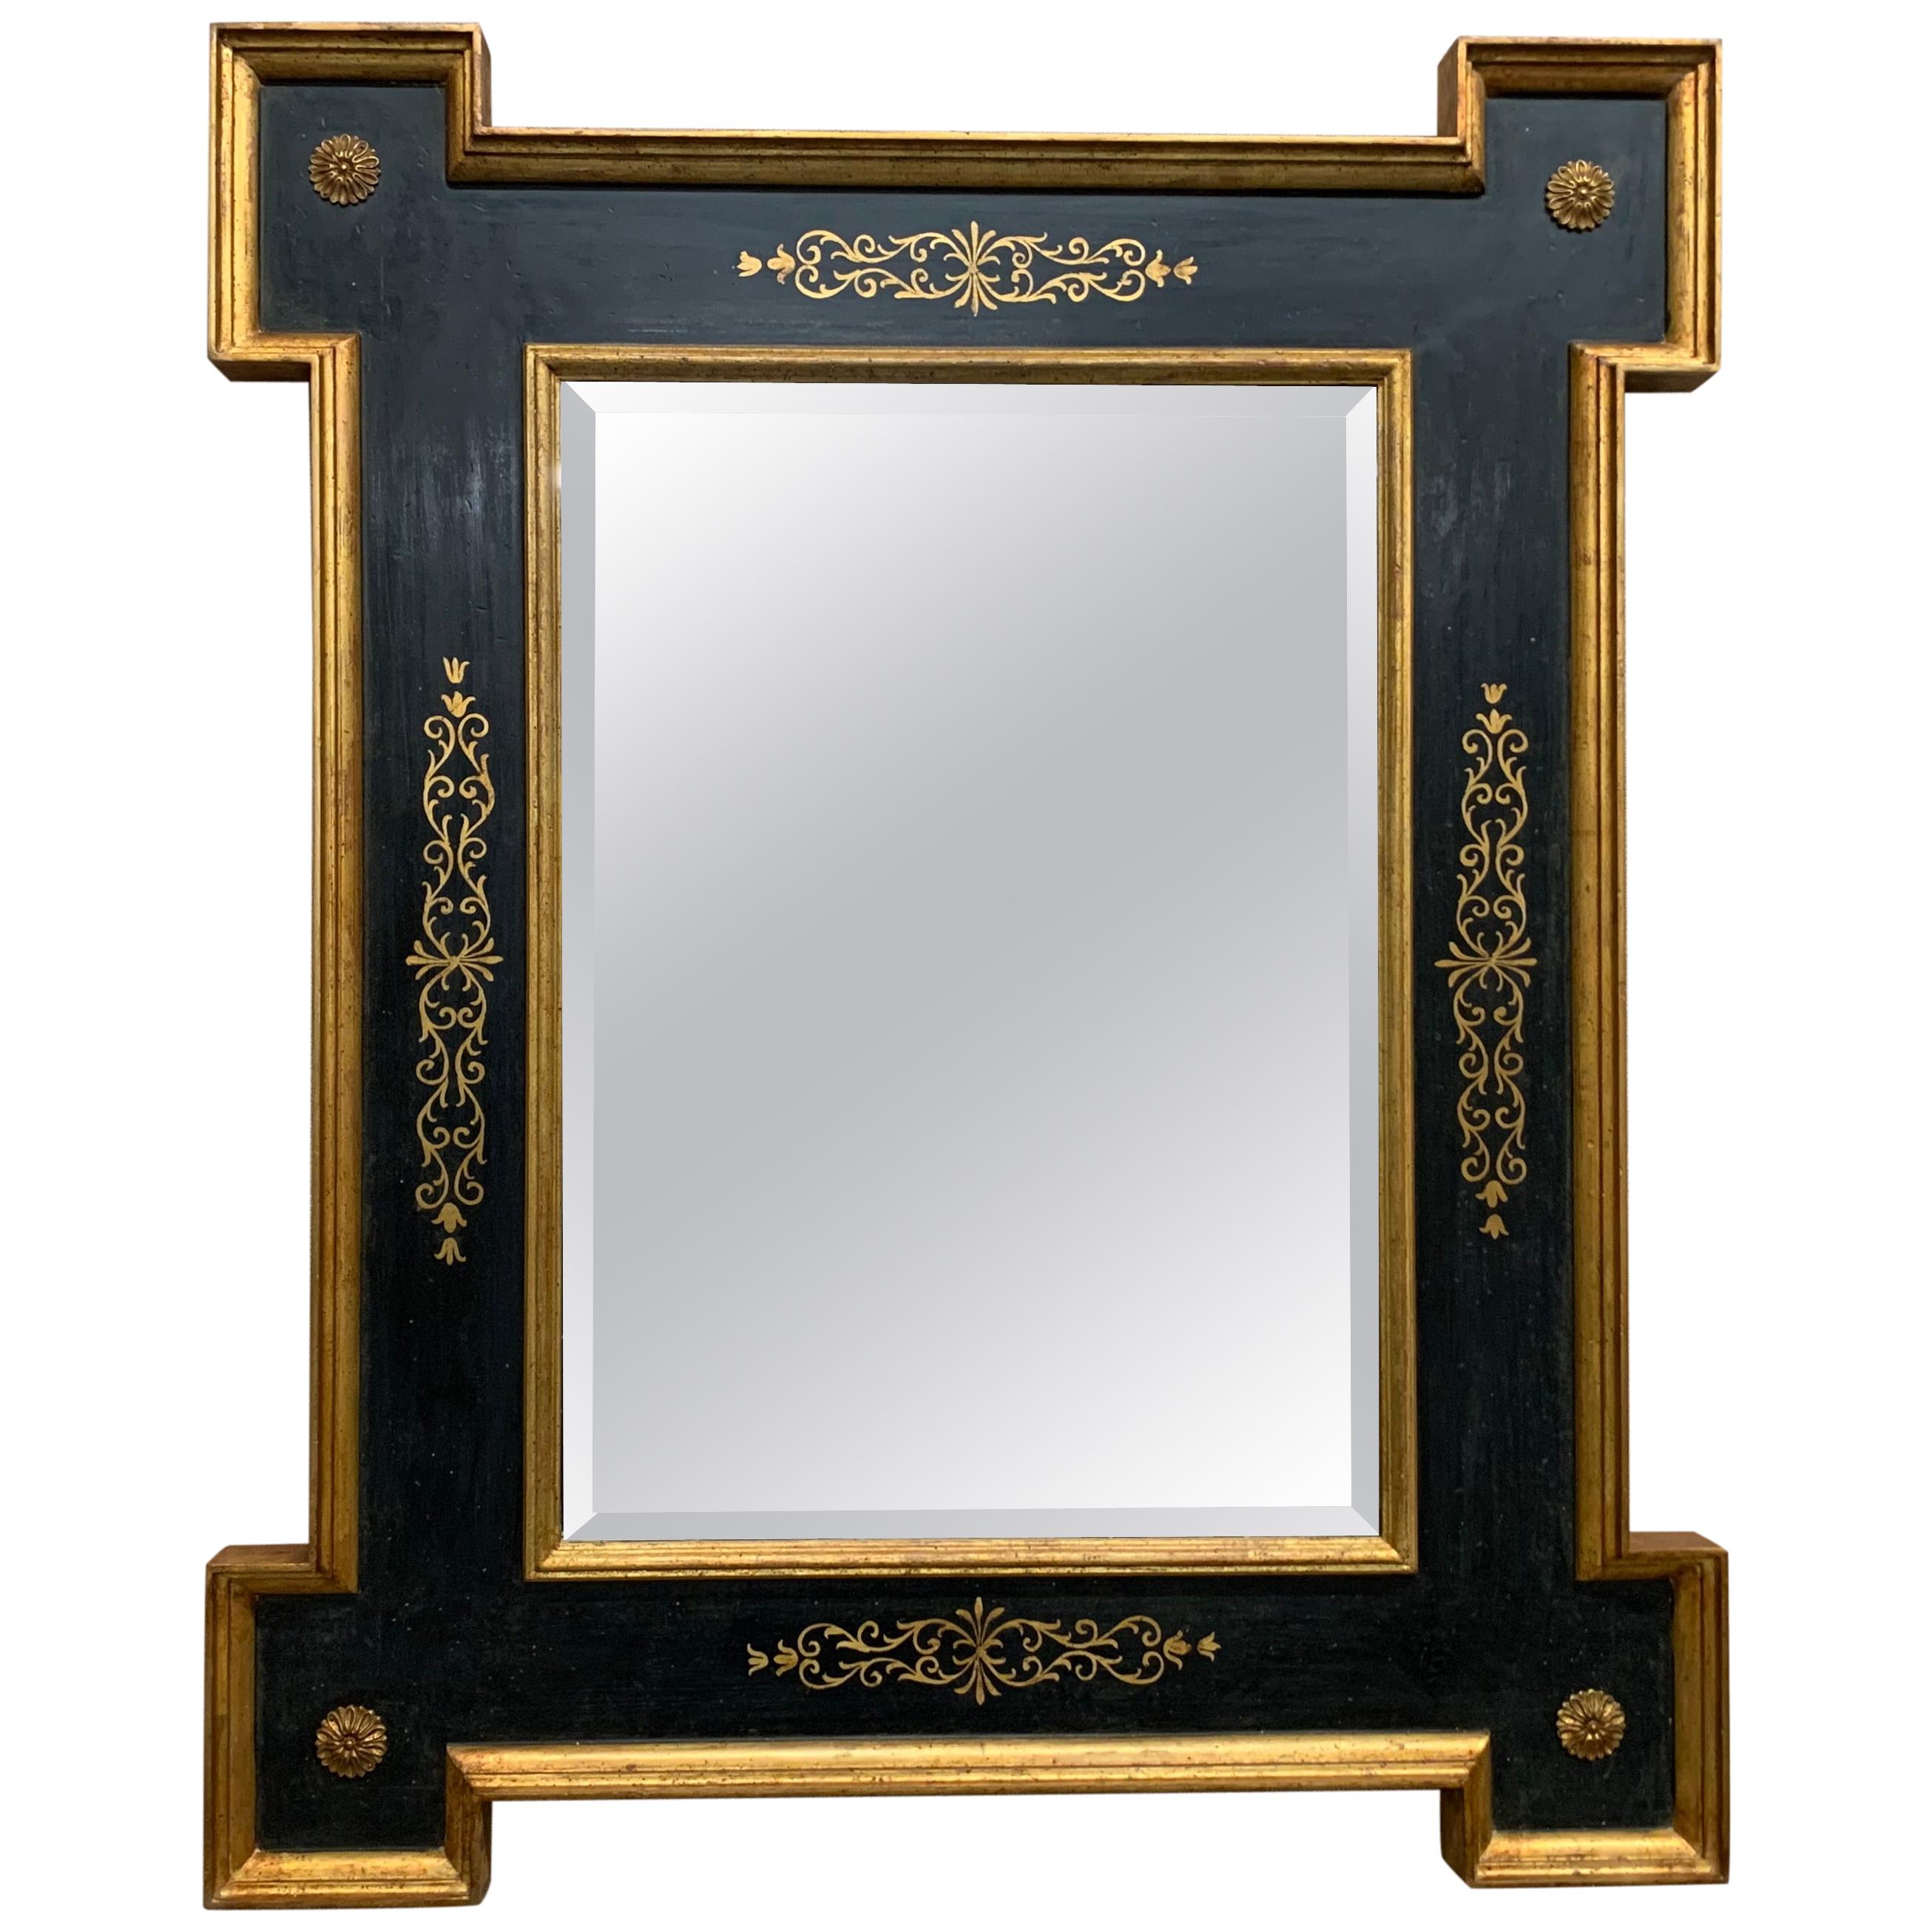 Italian Mirror-Hand Painted Black with Extended Corners and Gilt Borders